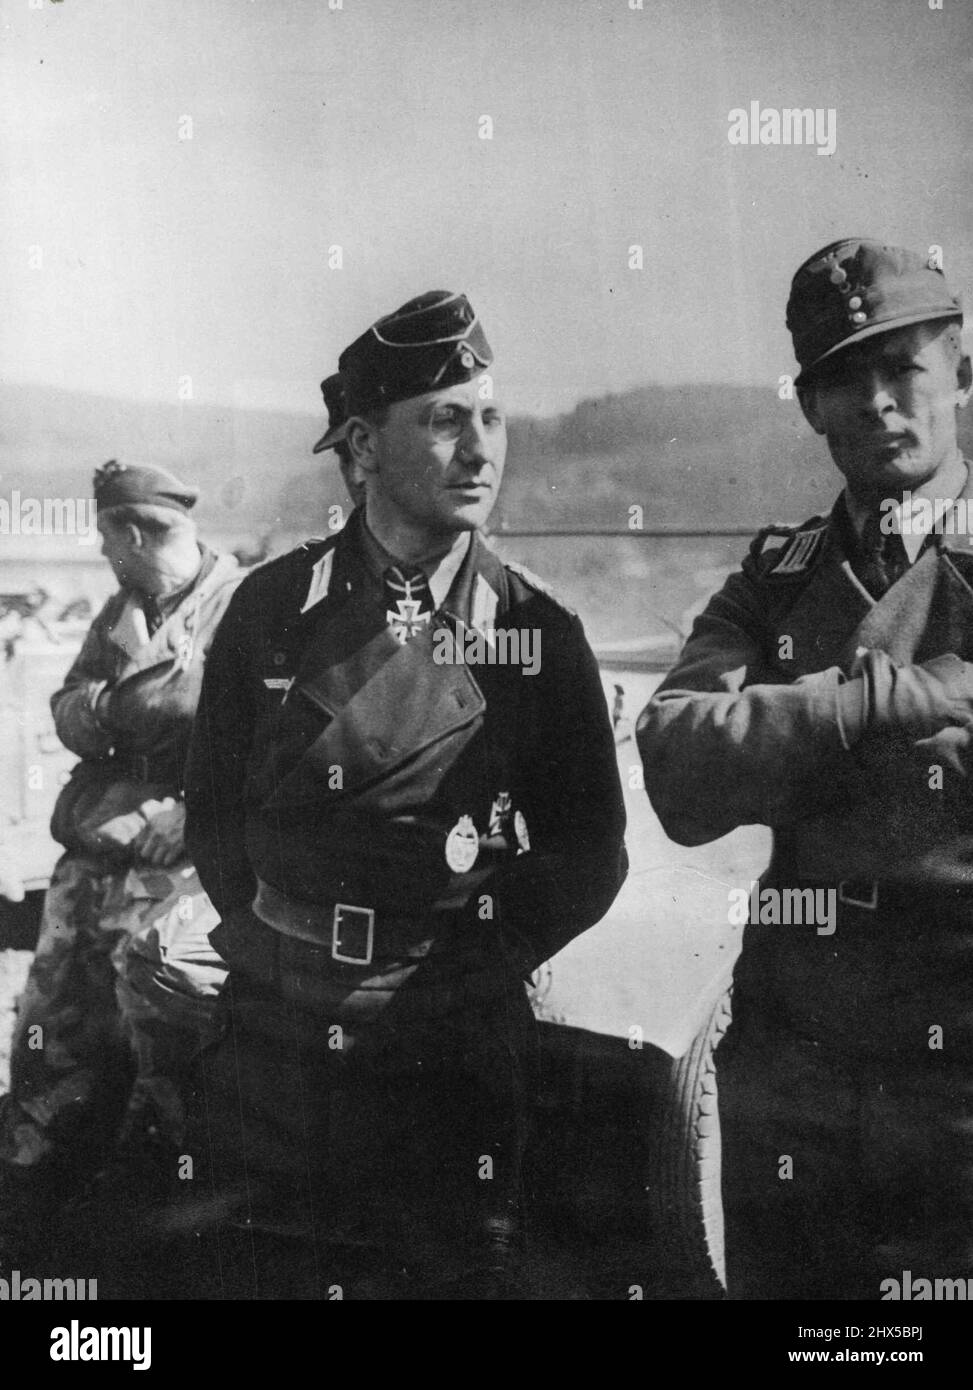 Guderian Jr. Captured - With Monocle. Monocled Lieutenant Colonel Heinz Guderian, son of the Nazi panzer expert and commander of a unit of the 116th. German Panzer Division. Captured with other senior Nazi officers on the U.S. 1st Army front at Menden. April 27, 1945. (Photo by U.S. Official Photo). Stock Photo